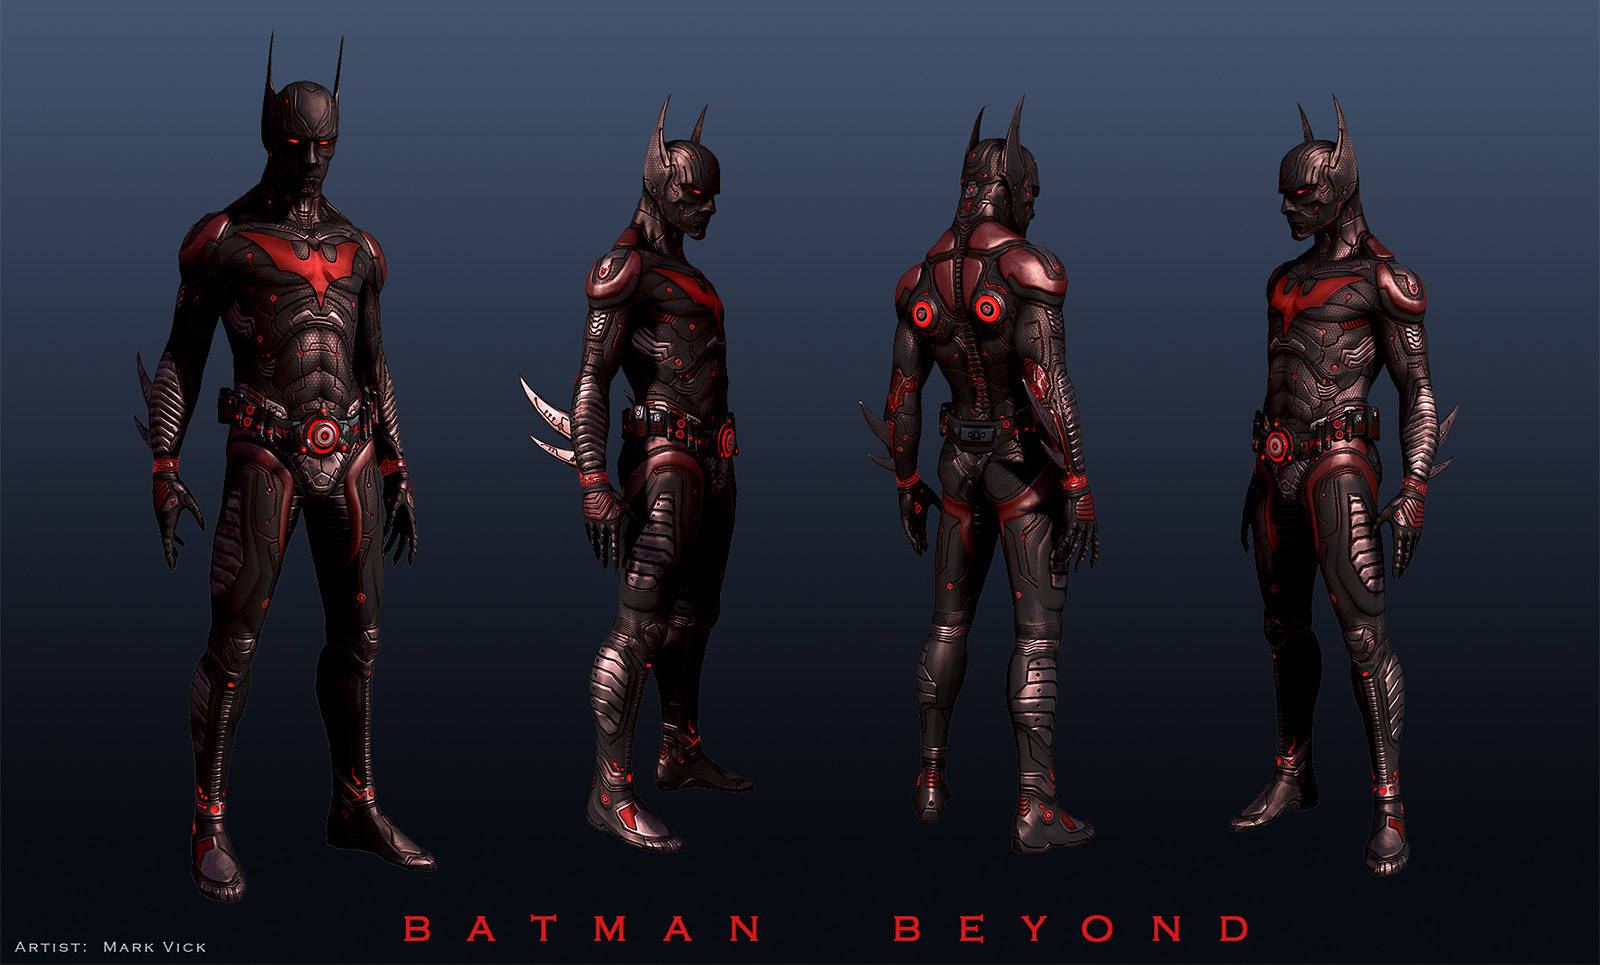 Behold! Batman Beyond, the hyper-evolved protector of the future. Wallpaper